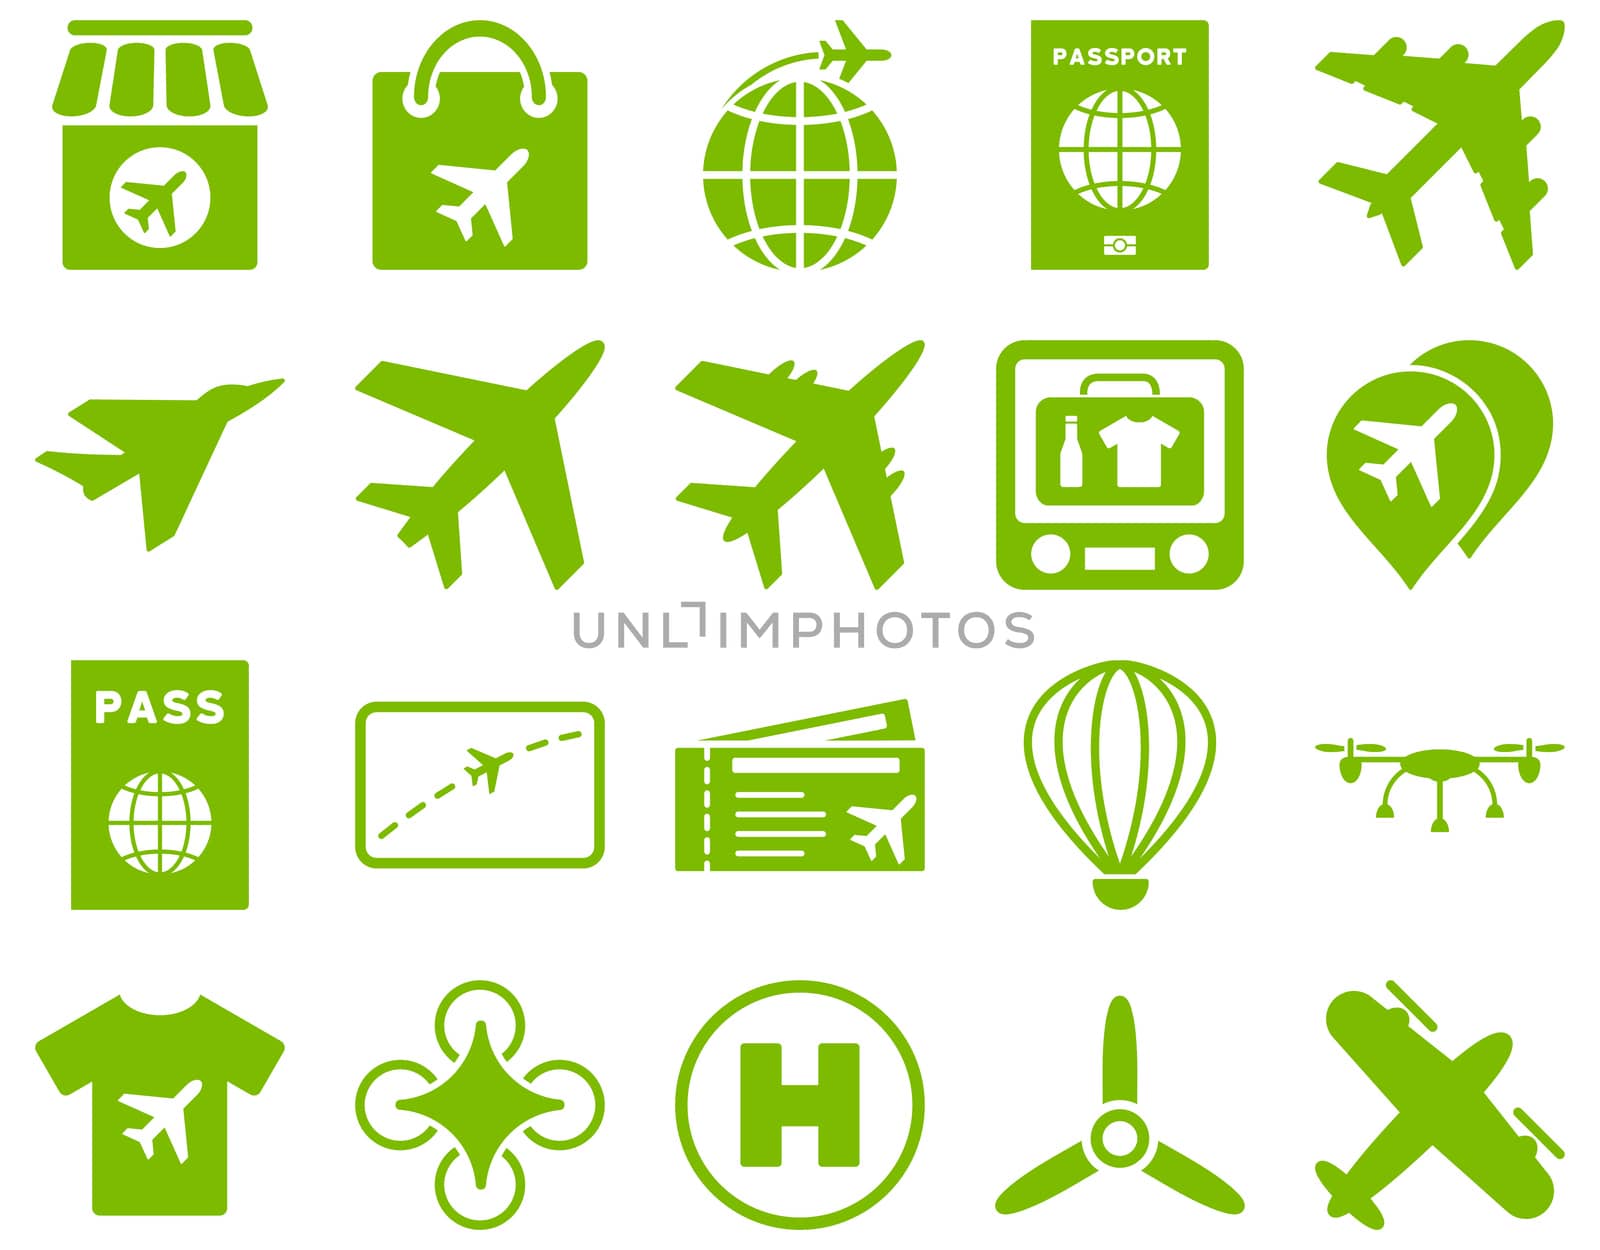 Airport Icon Set. These flat icons use eco green color. Raster images are isolated on a white background.